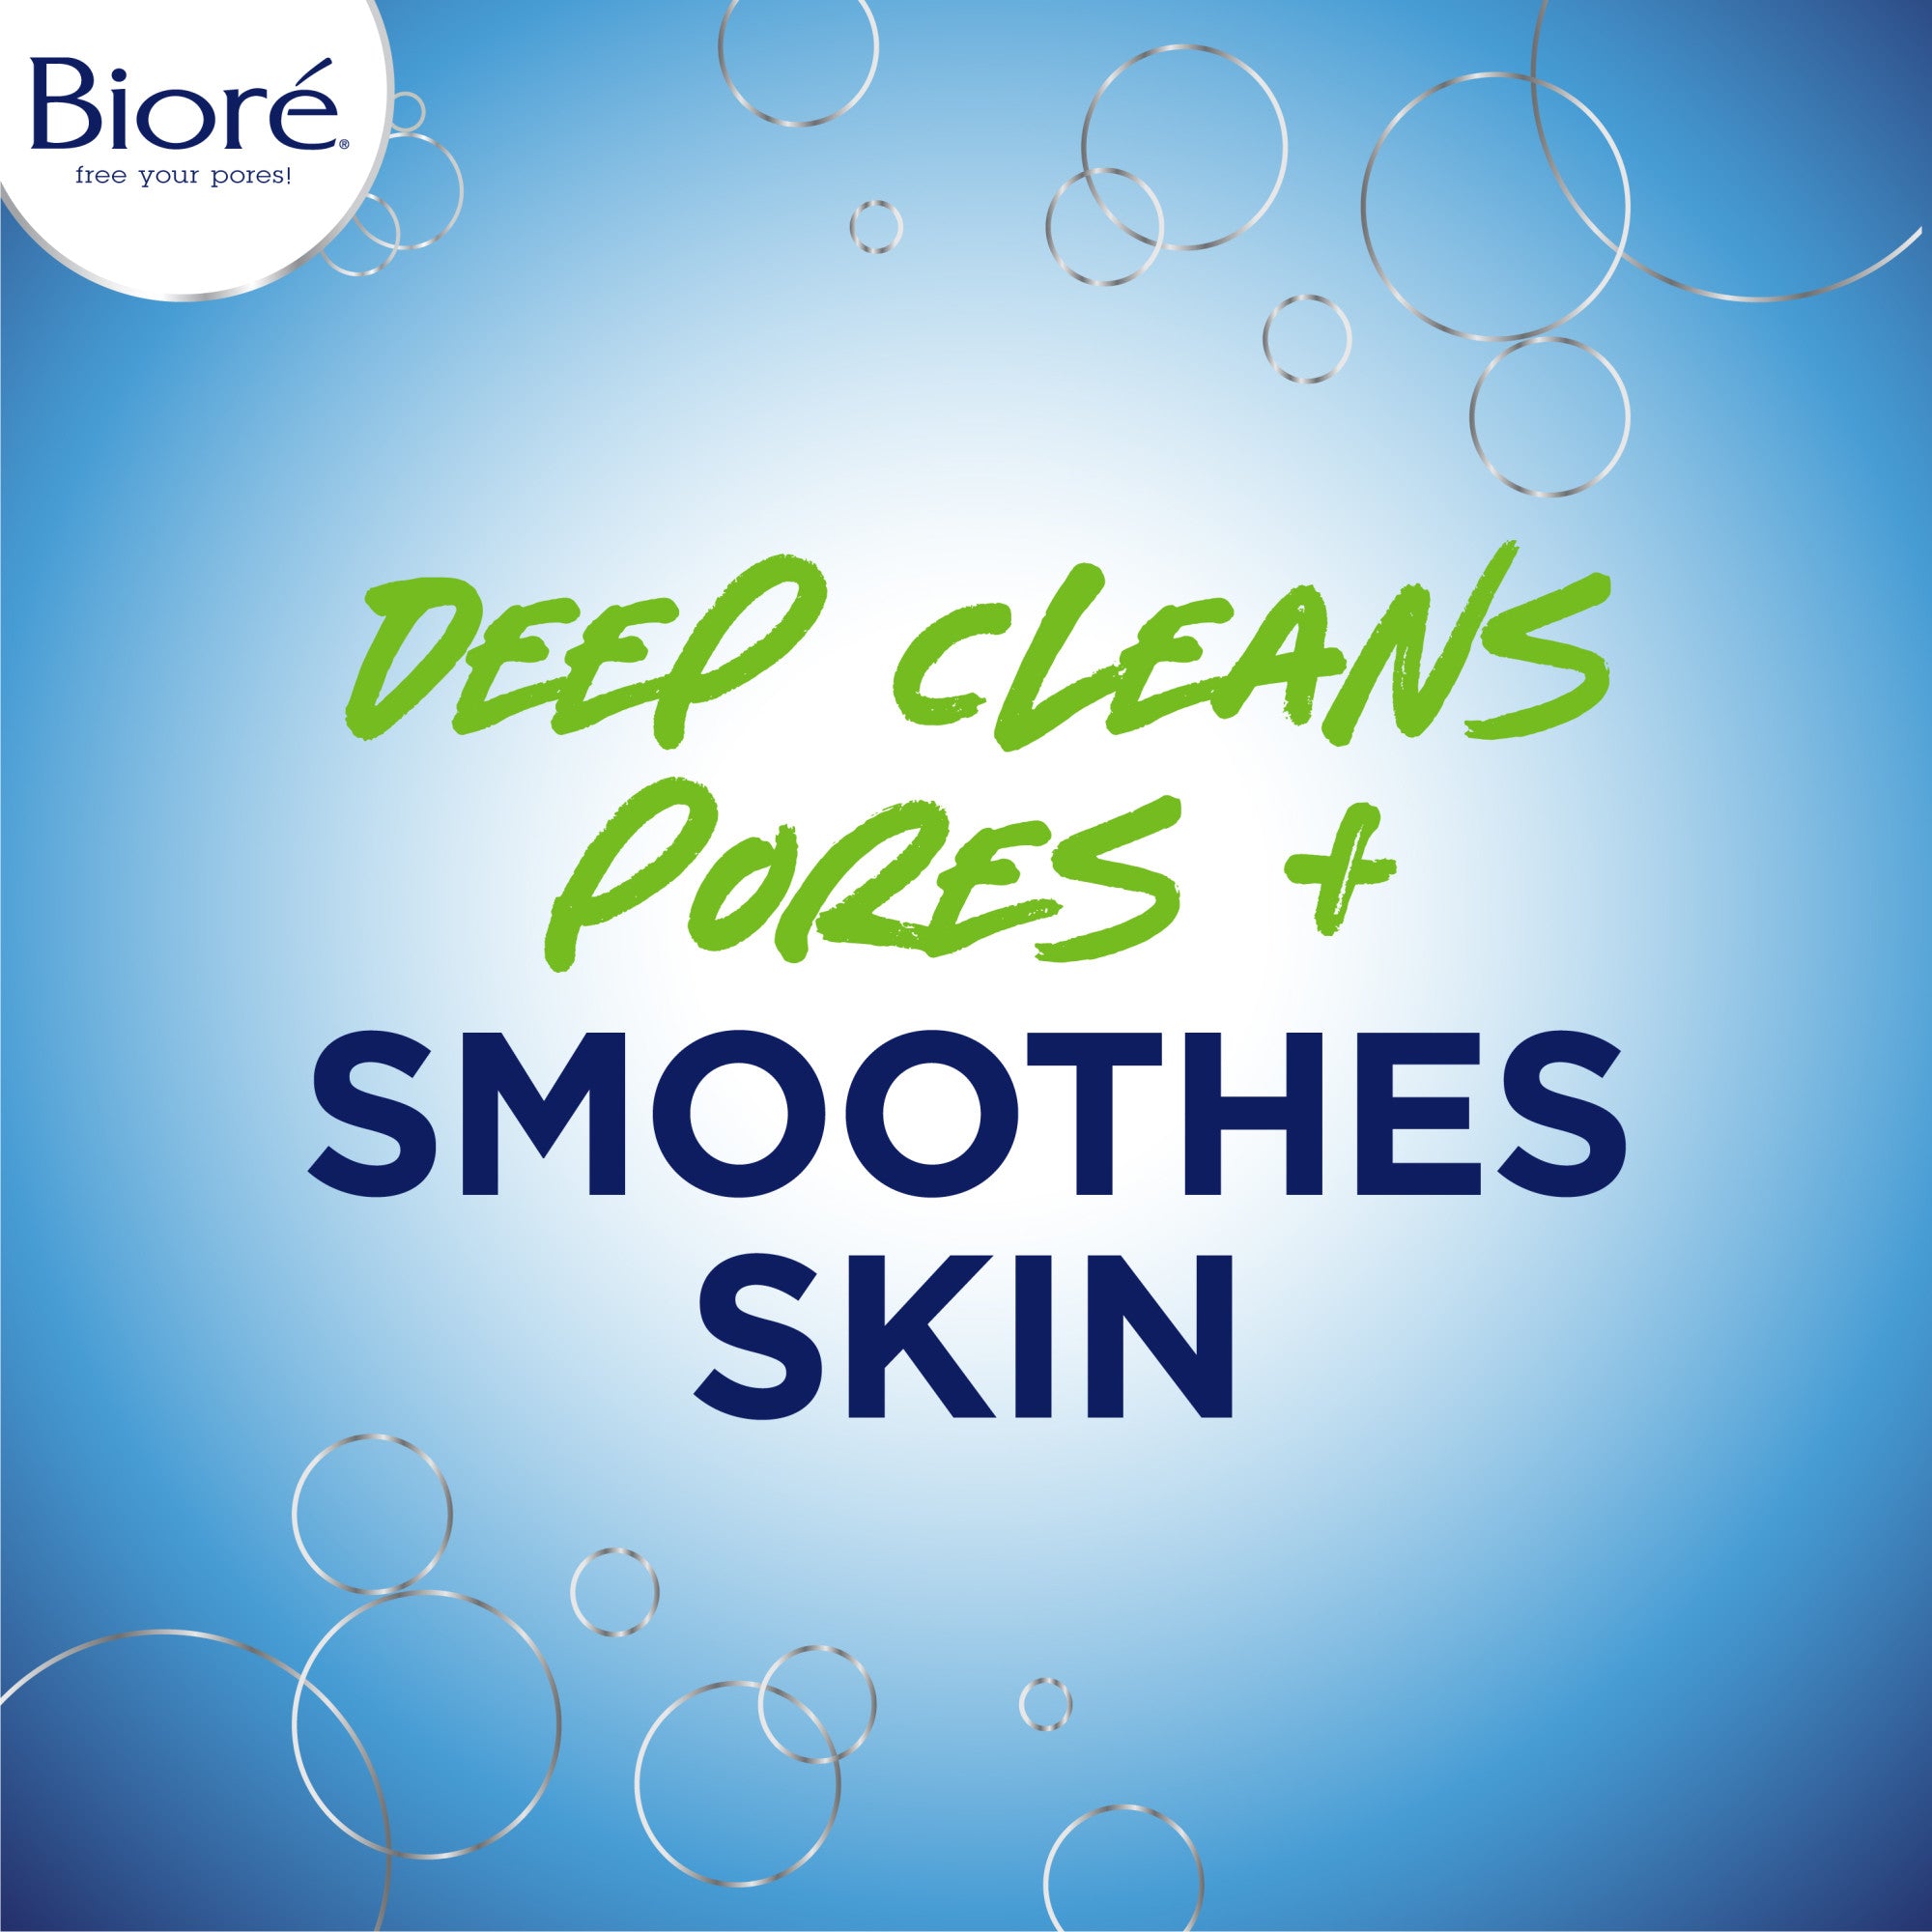 Deep cleans pores and smoothes skin.